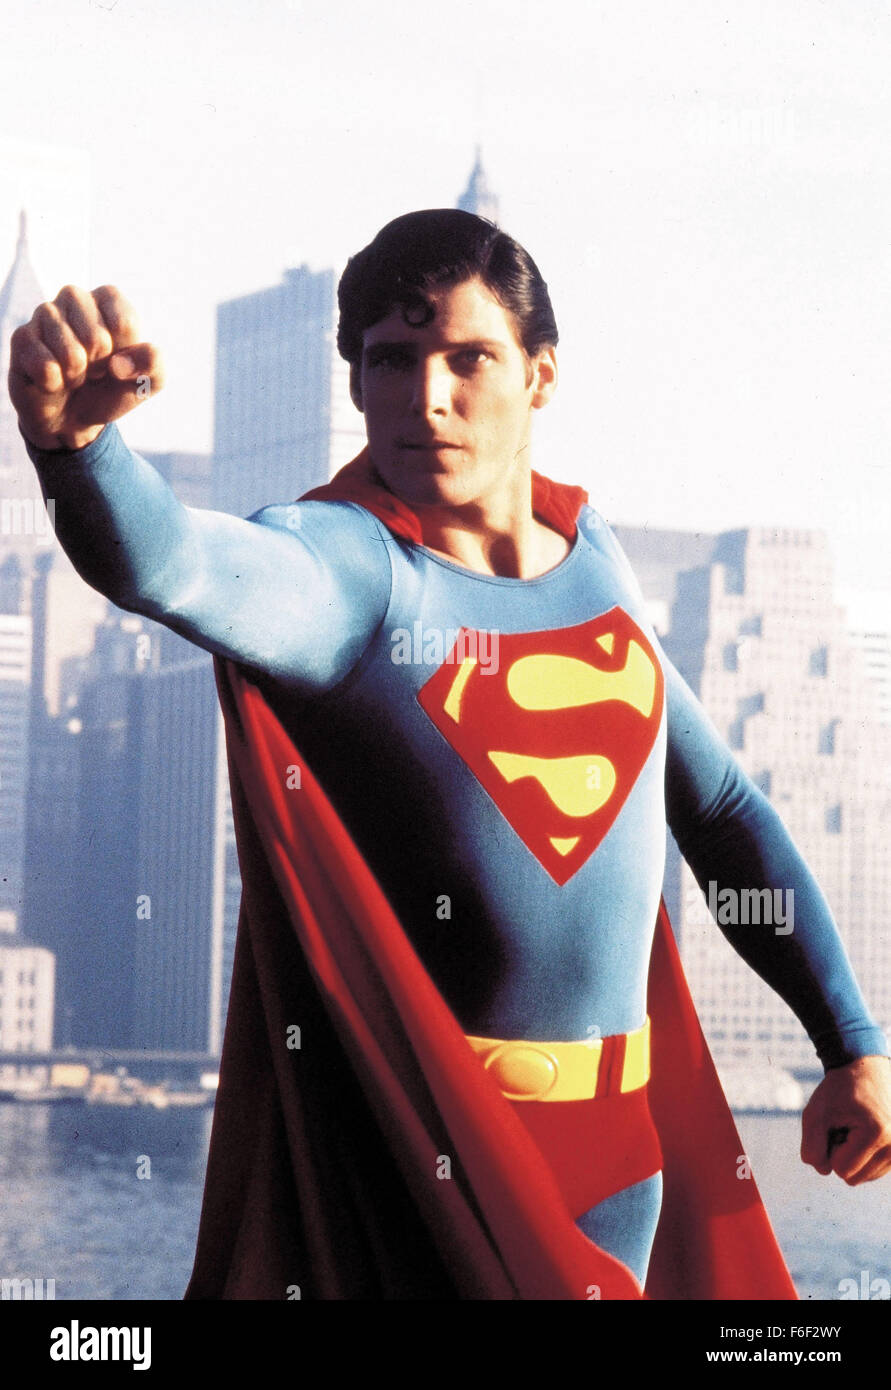 Jun 01, 1978 - Hollywood, CA, USA - Actor CHRISTOPHER REEVE stars as Superman and Clark Kent in the original 'Superman' movie, directed by Richard Donner. (Credit Image: c Courtesy of Int'l Film P.) RESTRICTIONS: This image is NOT available for commercial or promotional use and is being made available for editorial reference usage only. Stock Photo